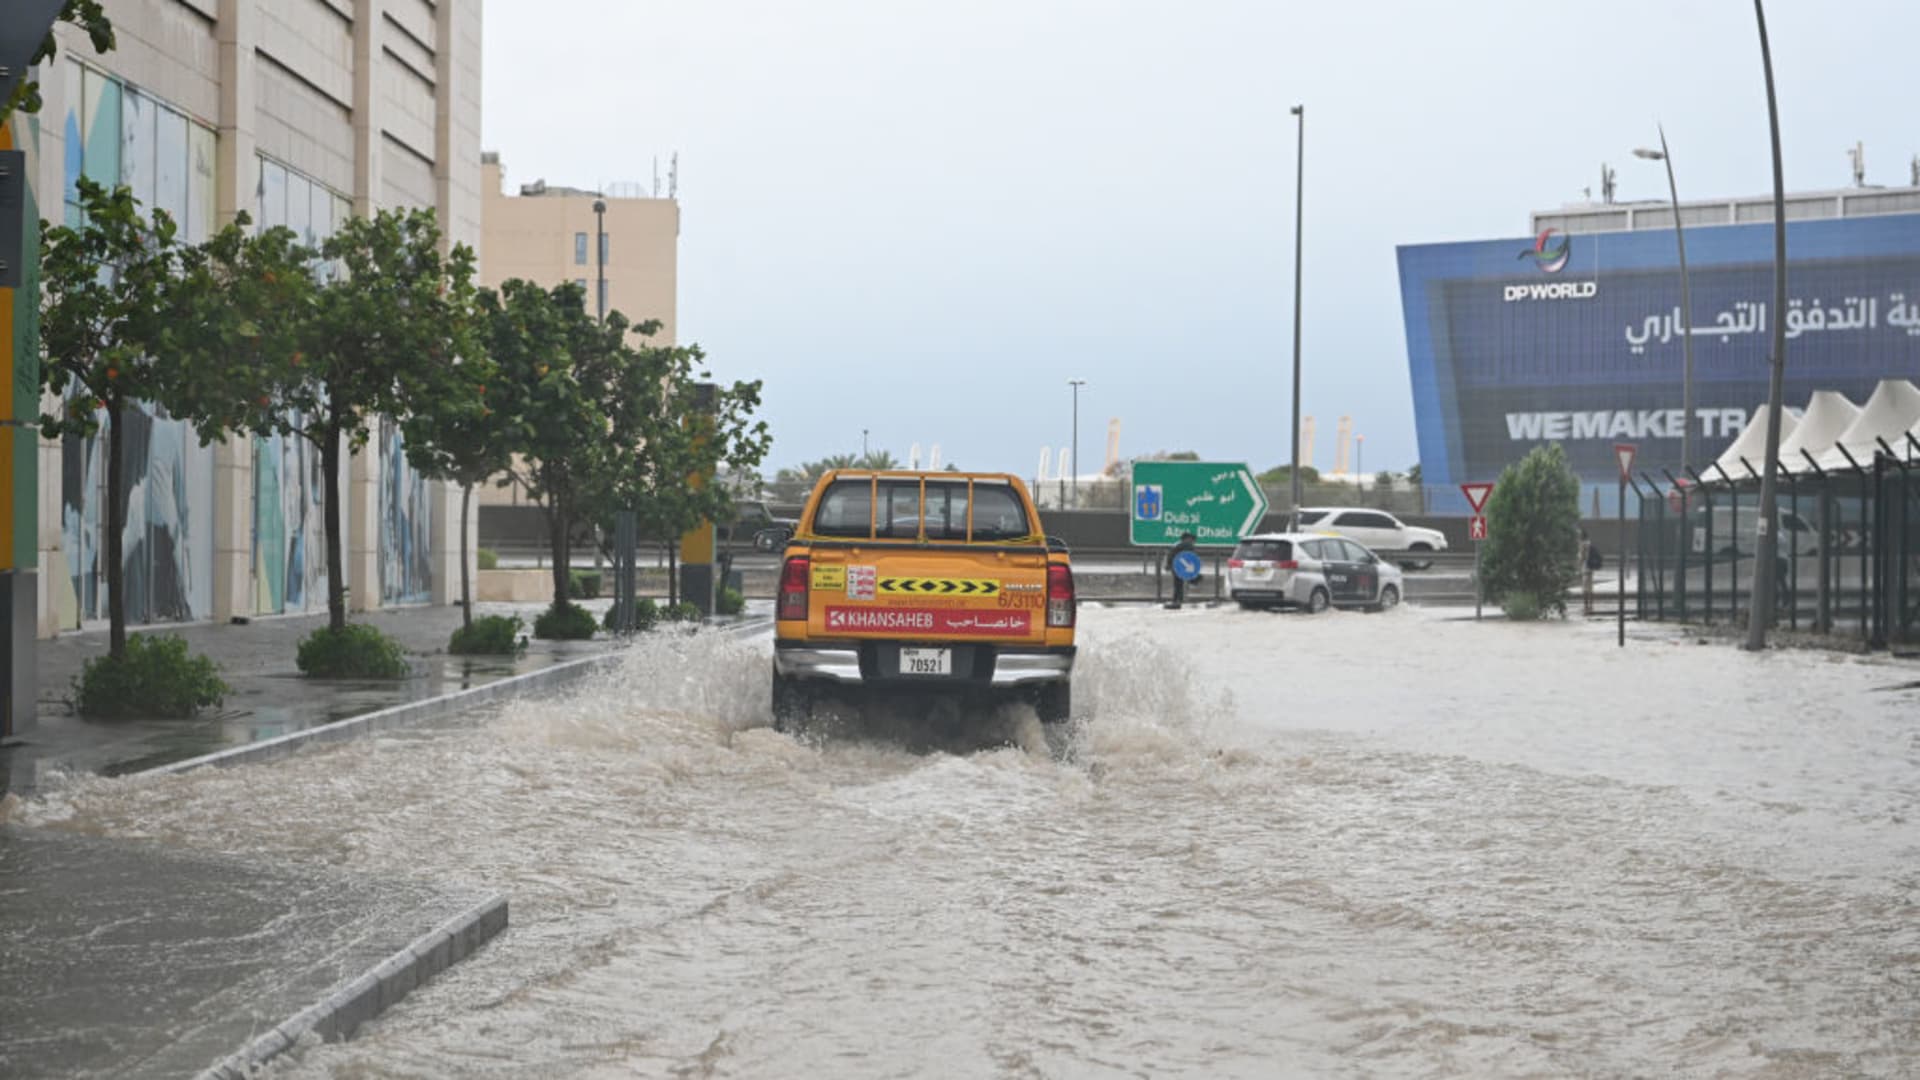 Photos show heavy rain and severe flooding in the United Arab Emirates